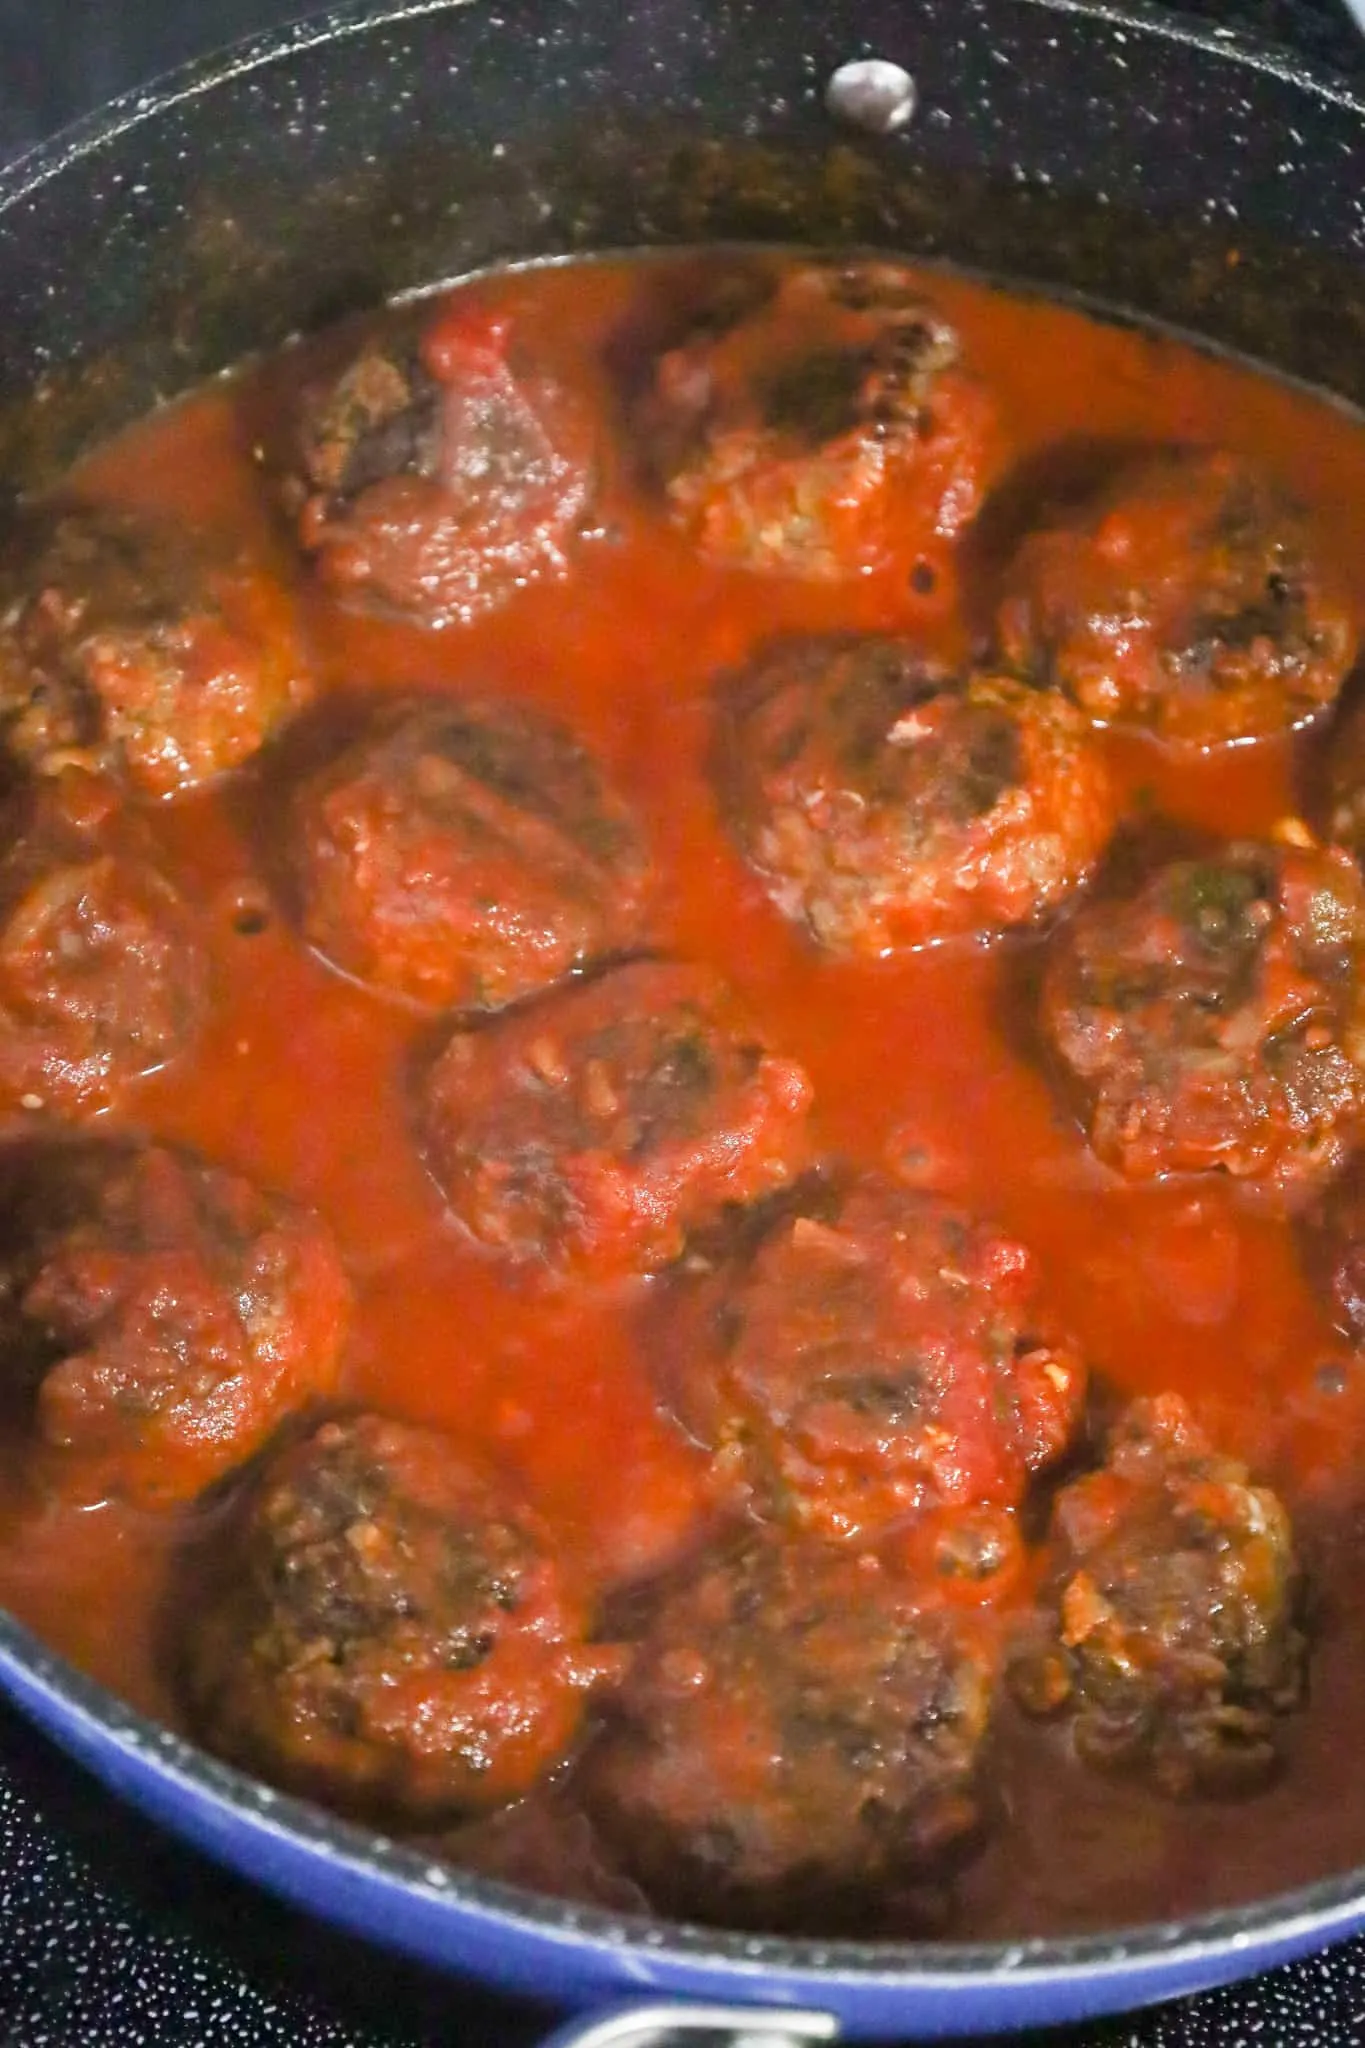 meatballs cooking in tomato sauce and salsa mixture